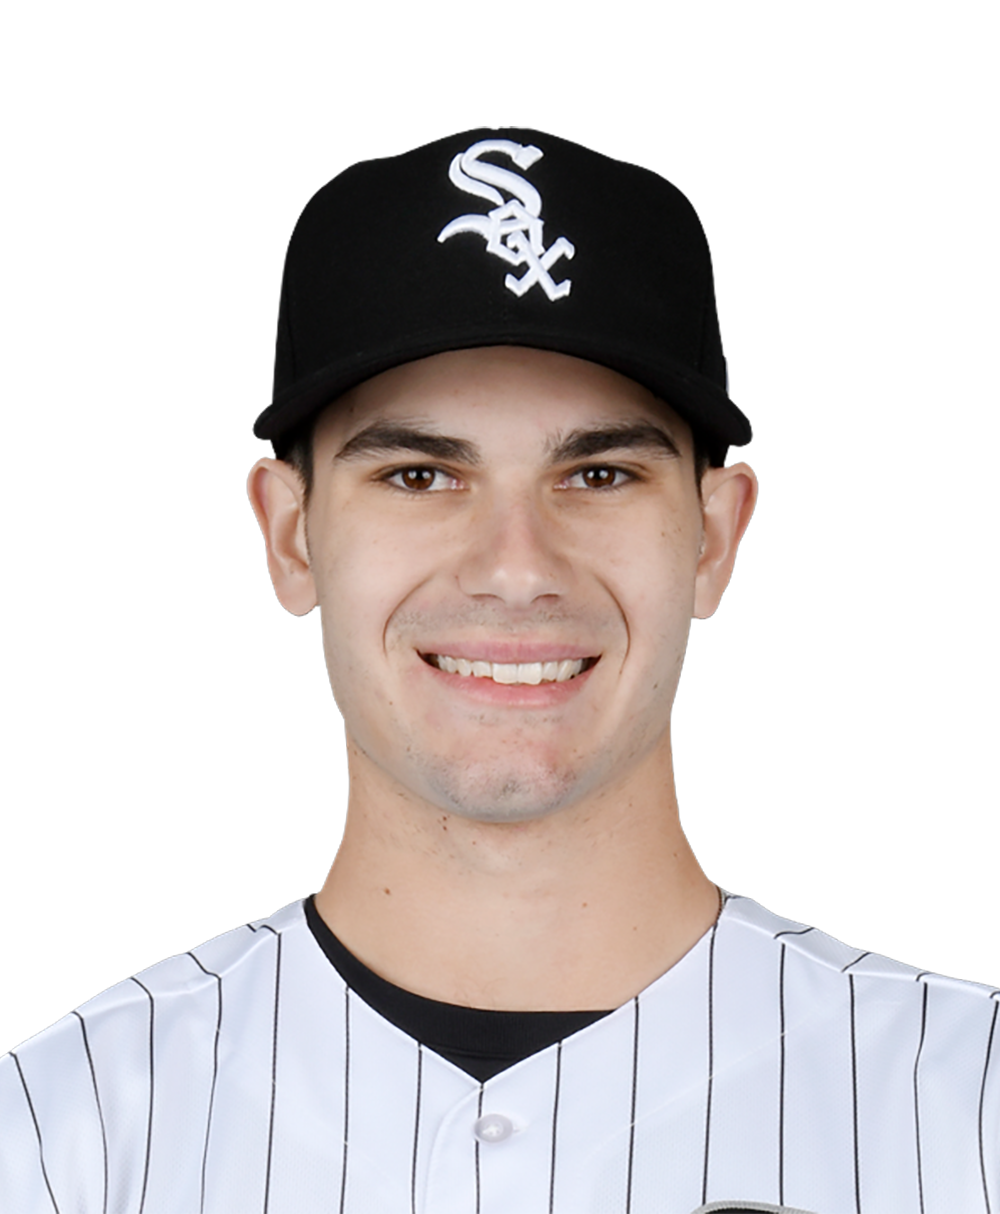 White Sox's Dylan Cease makes American League history with latest gem 